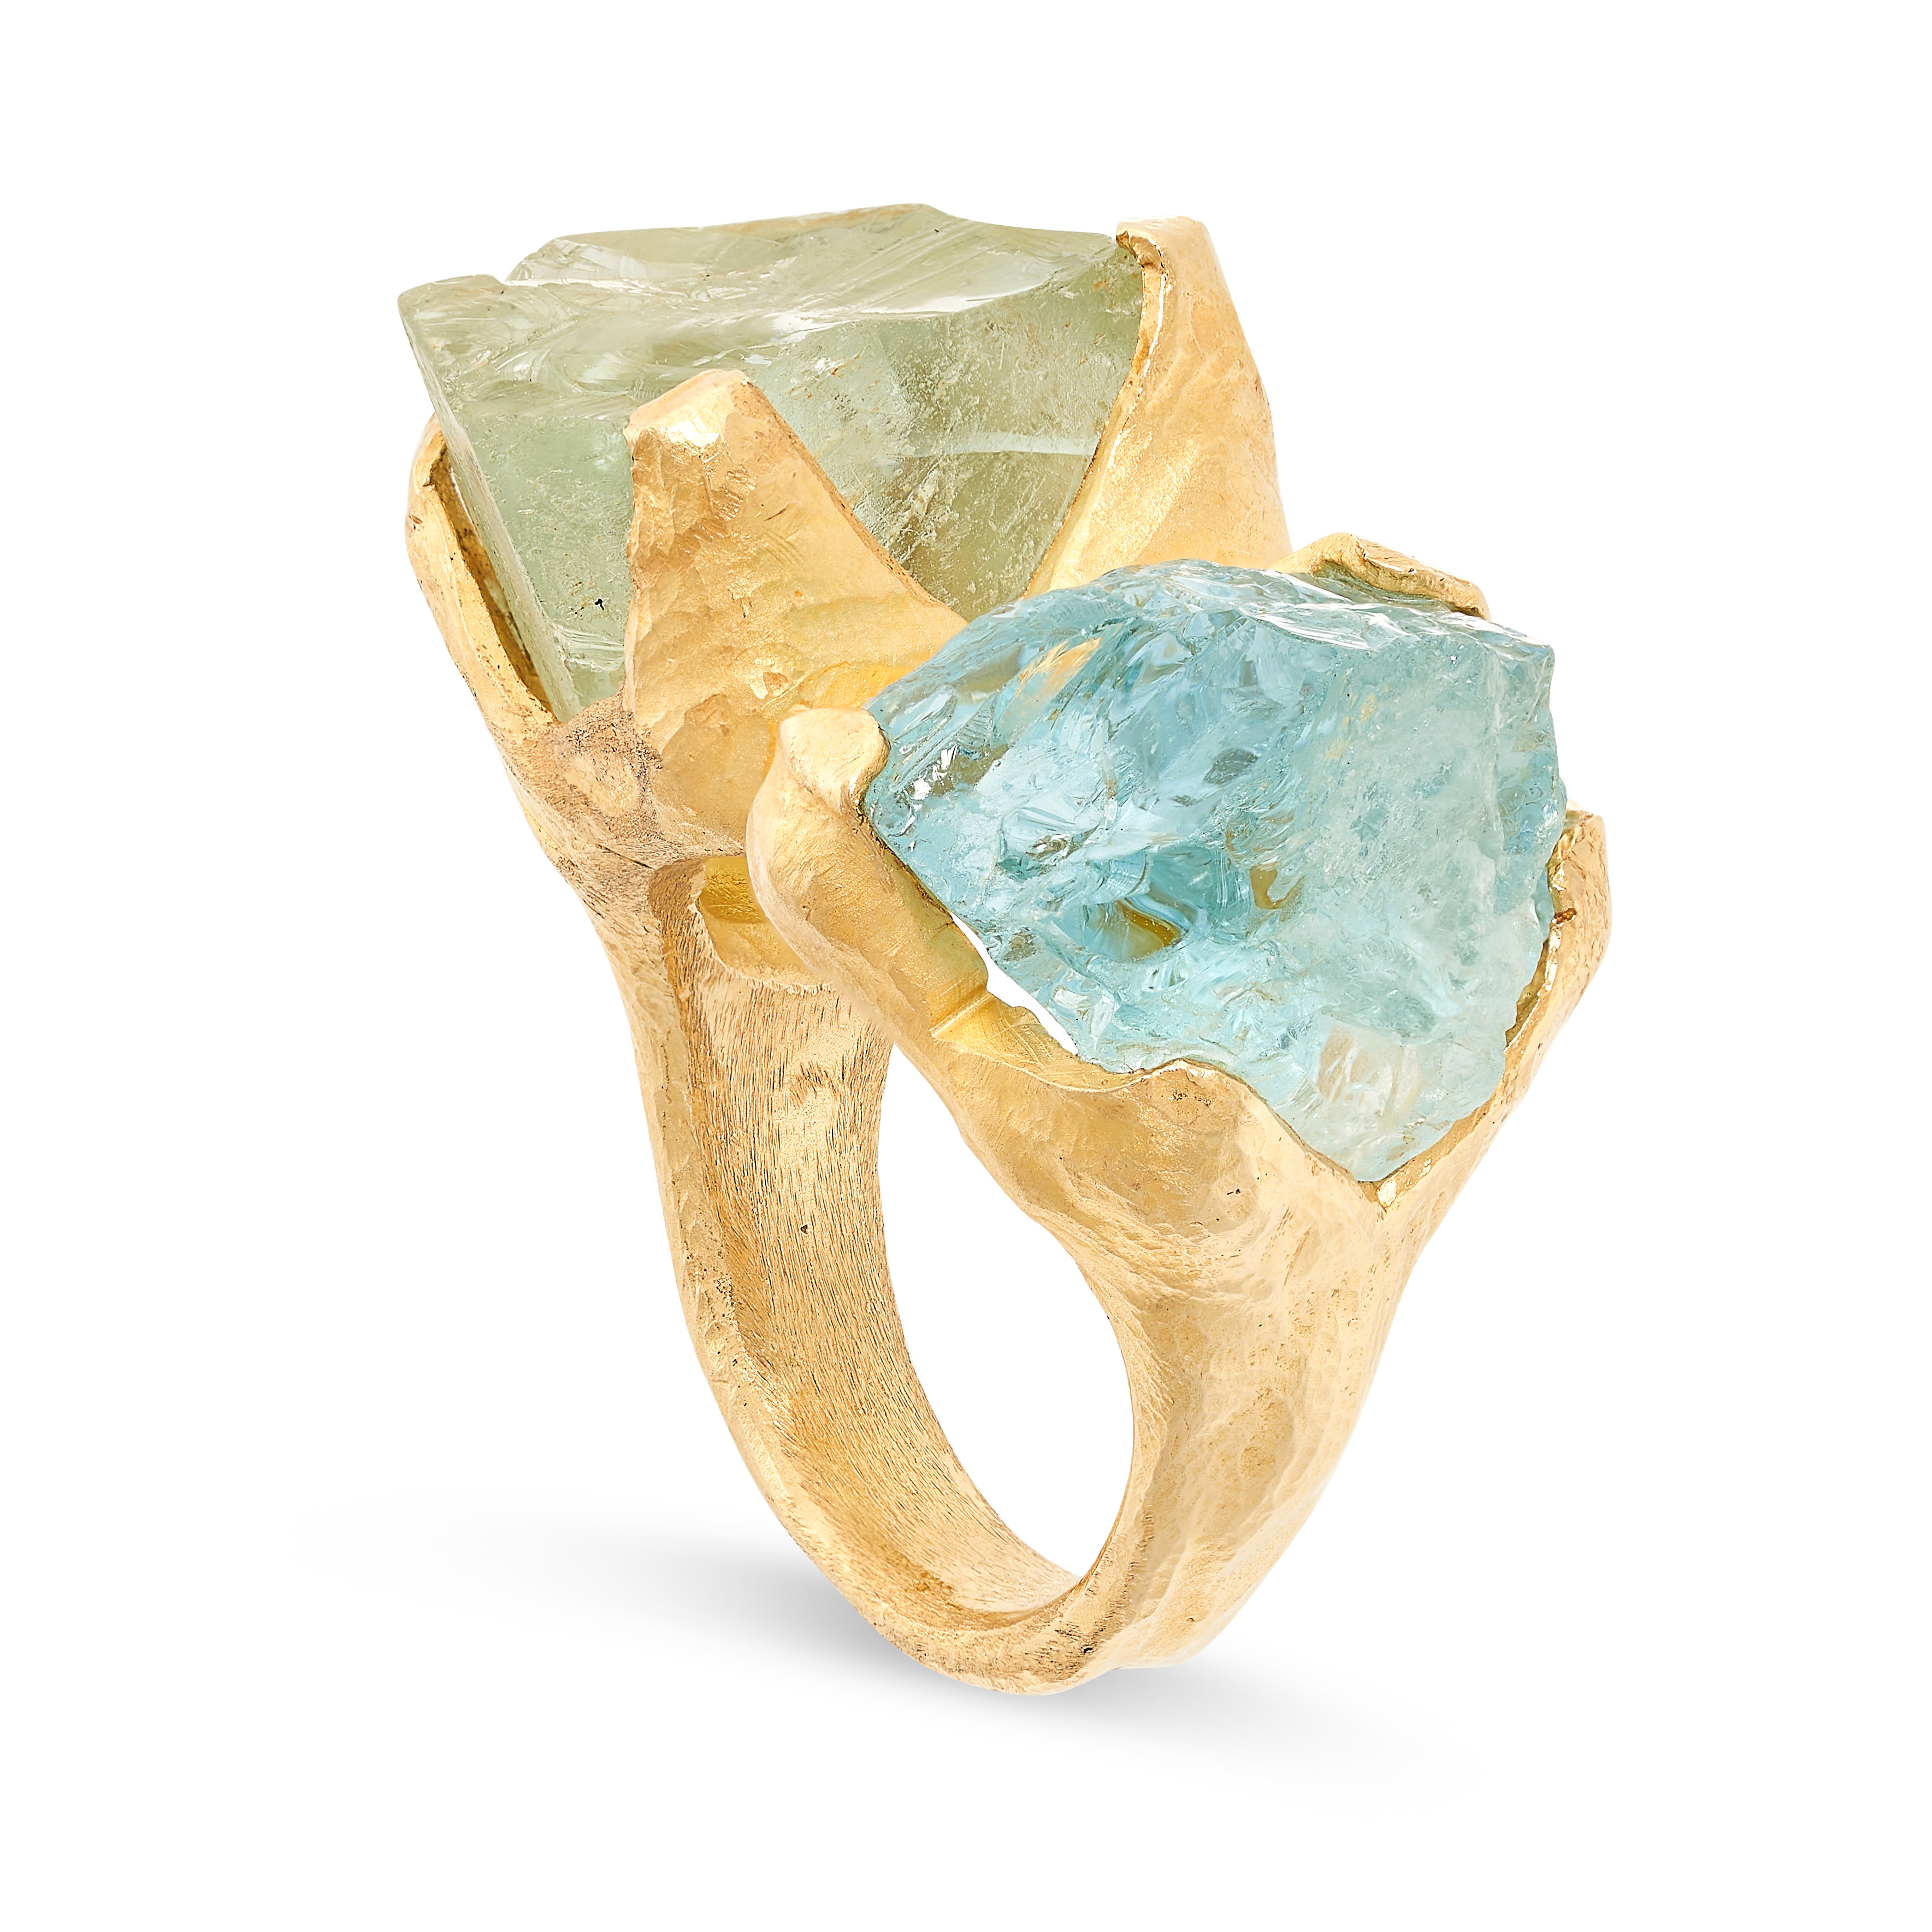 AN AQUAMARINE AND GREEN BERYL DRESS RING in yellow gold, set with a rough aquamarine and green beryl - Image 2 of 2